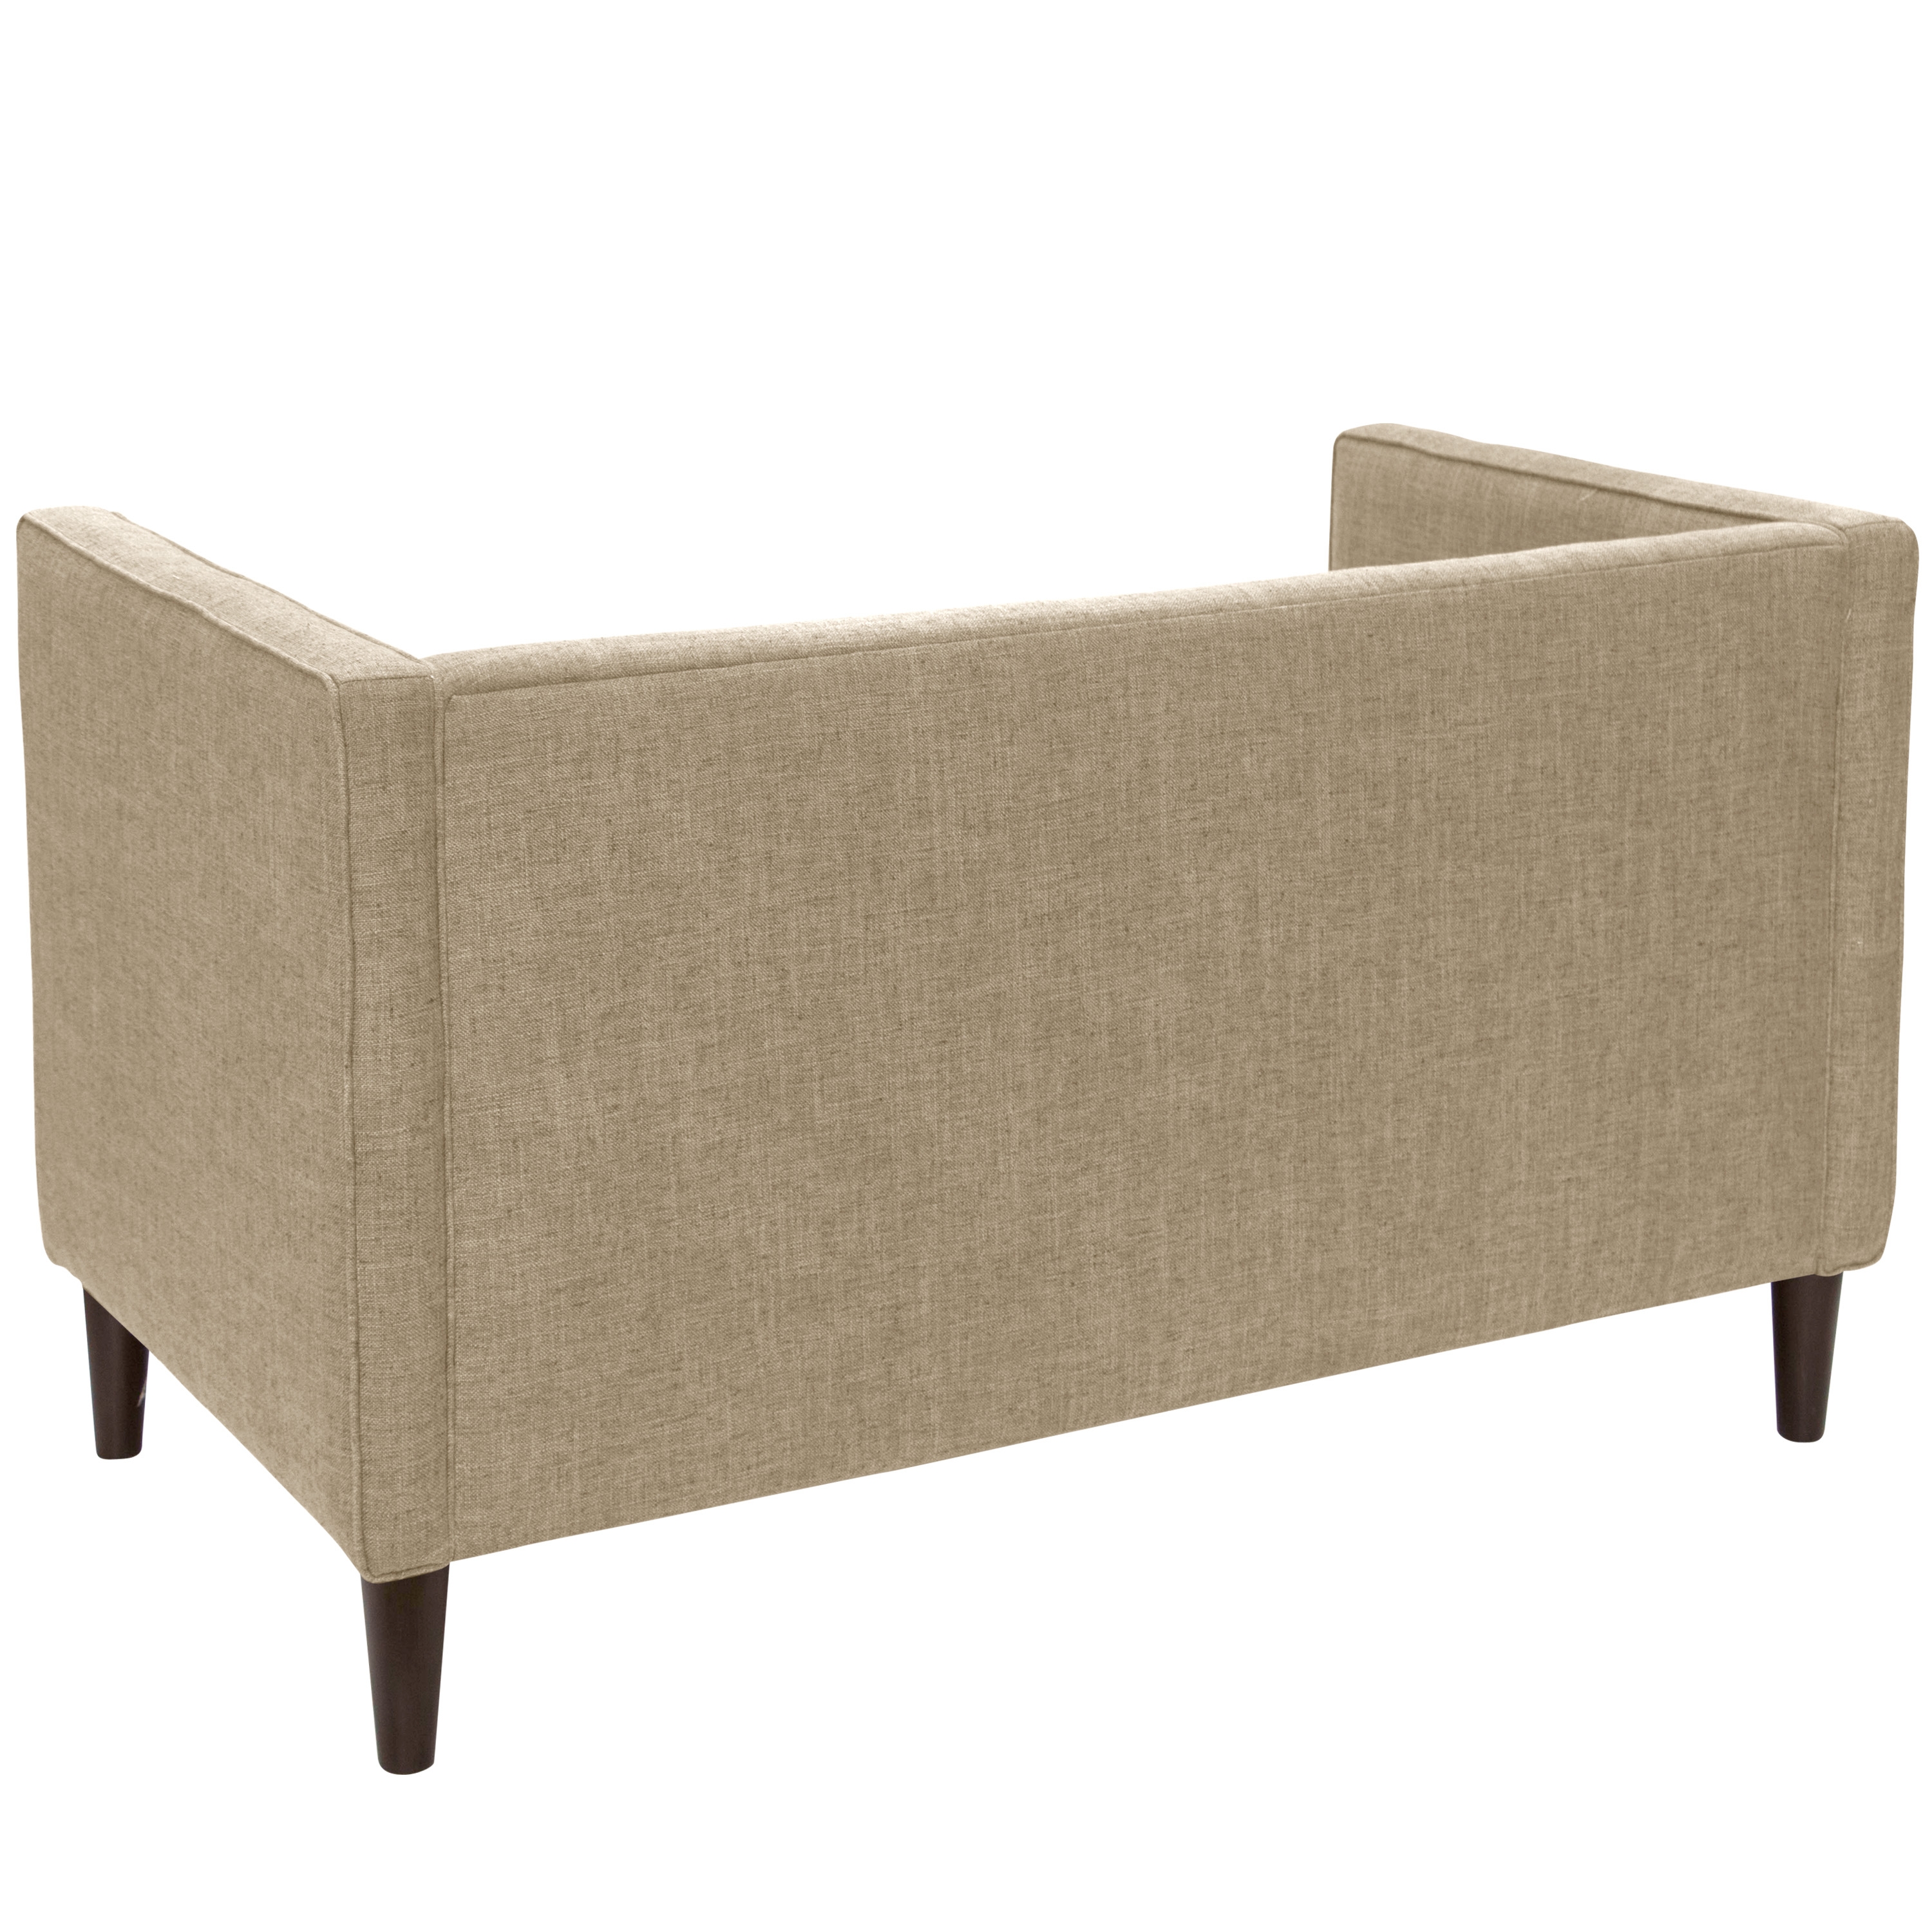 Downing Settee, Linen - DNU - Image 3